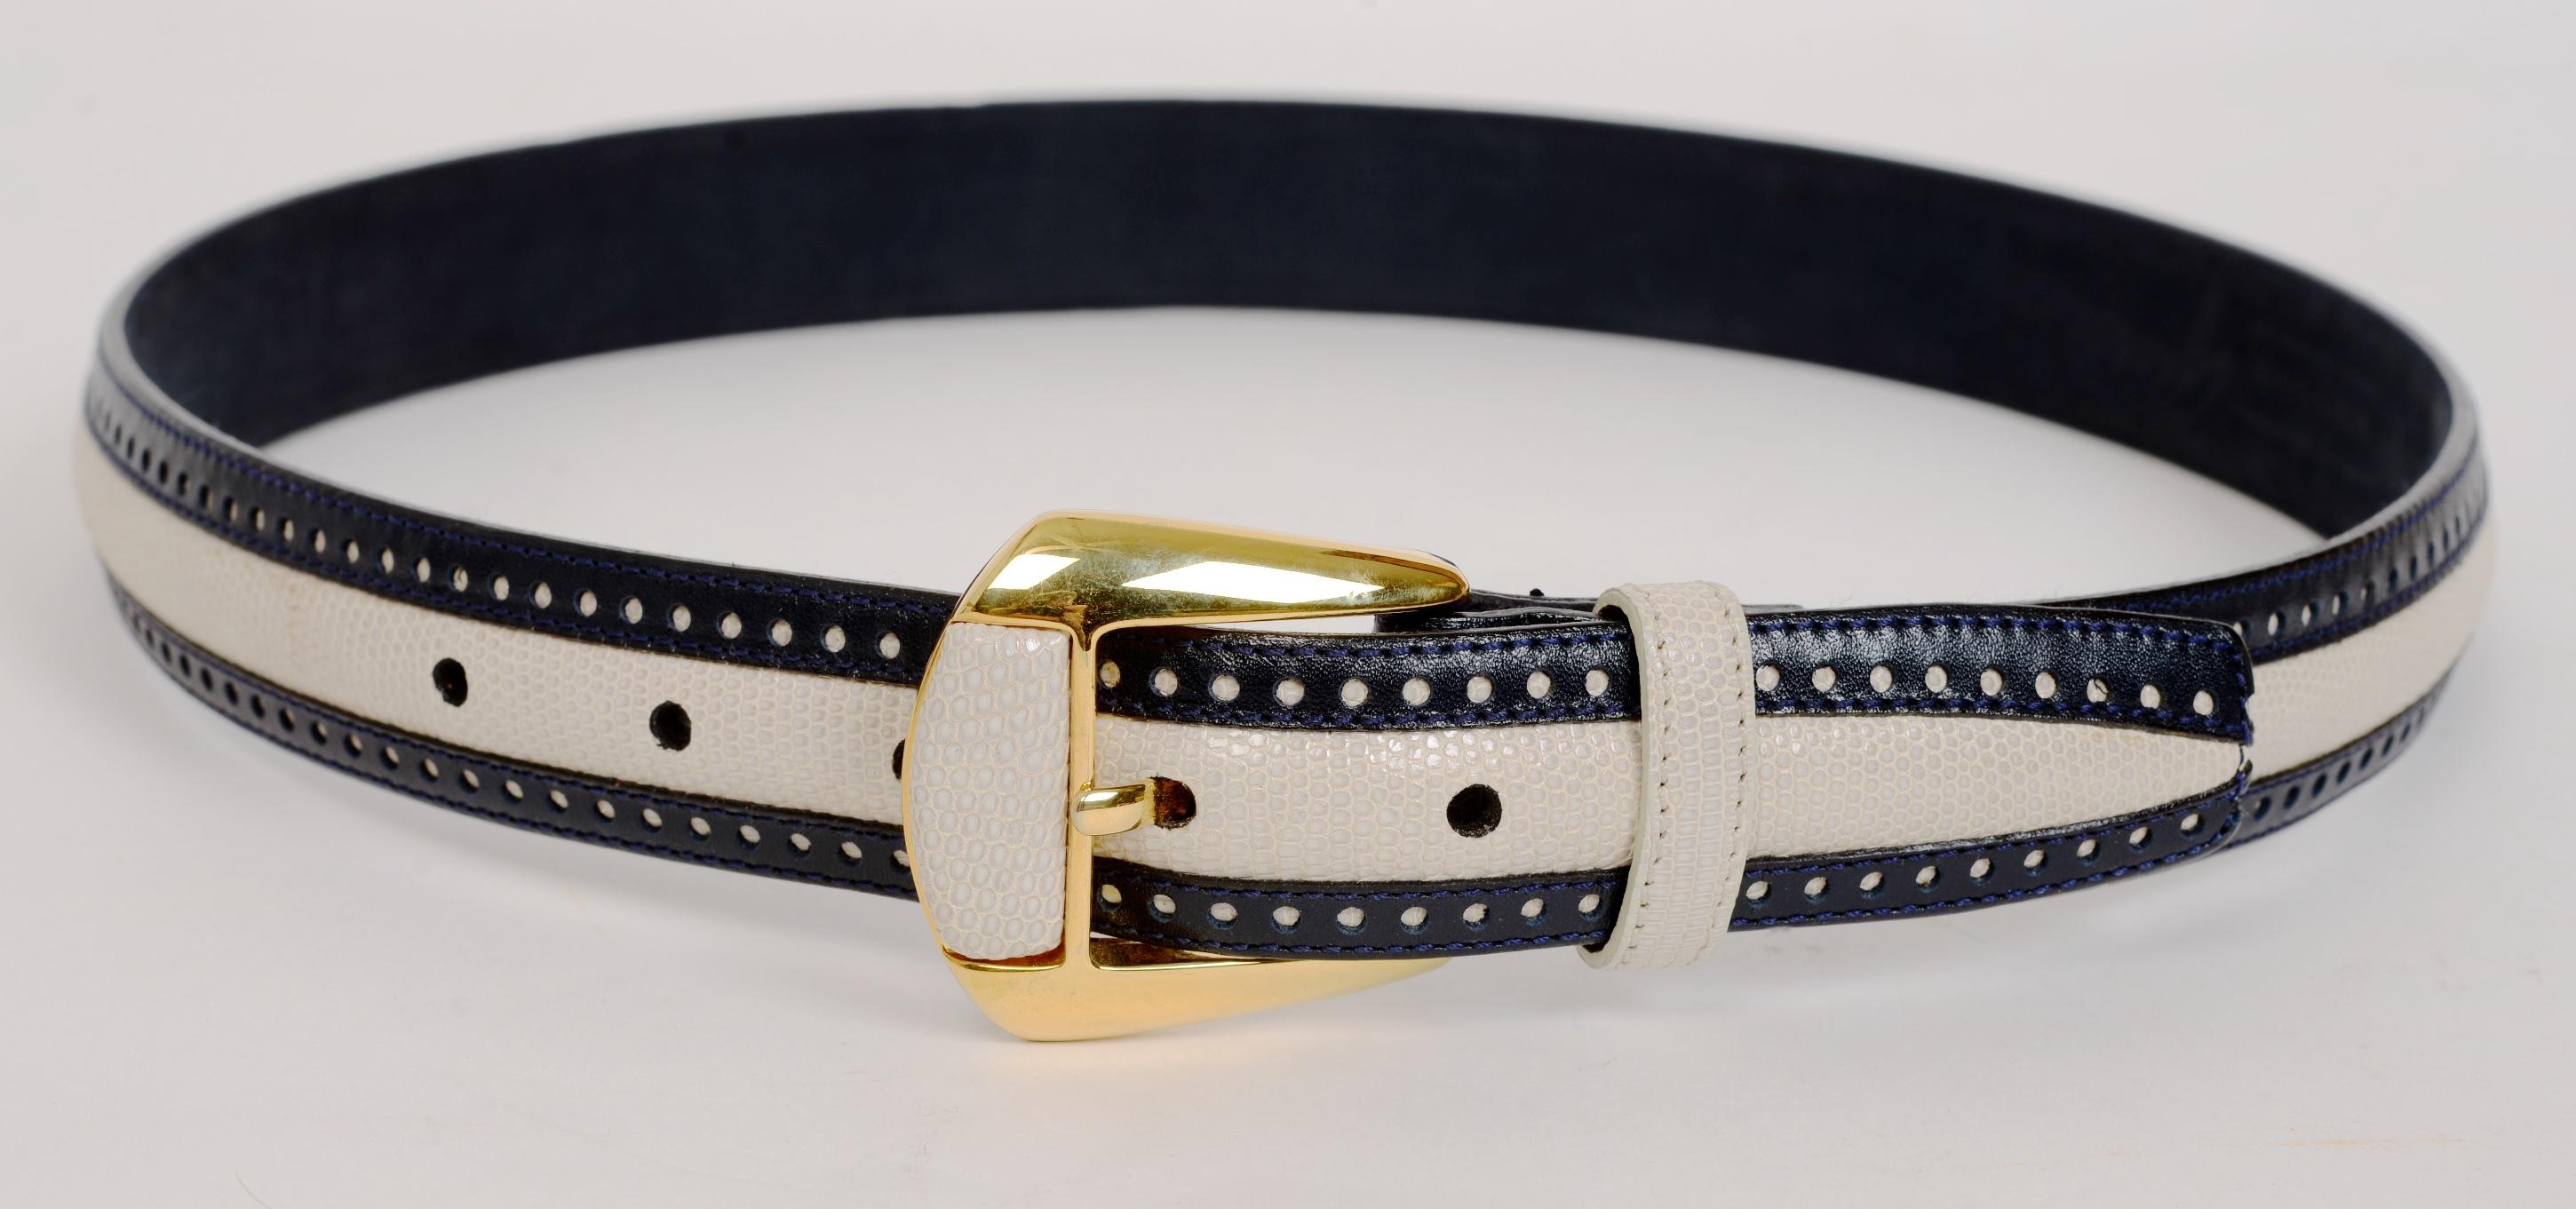 Blue Leather and White Lizard Belt, with Blue Suede Leather Back, by Giorgio's Worth Ave Palm Beach, Brand New. Typical of Giorgio's quality with his typical attention to detail. The buckle is gilt brass with inlaid, matching lizard detail. Brand